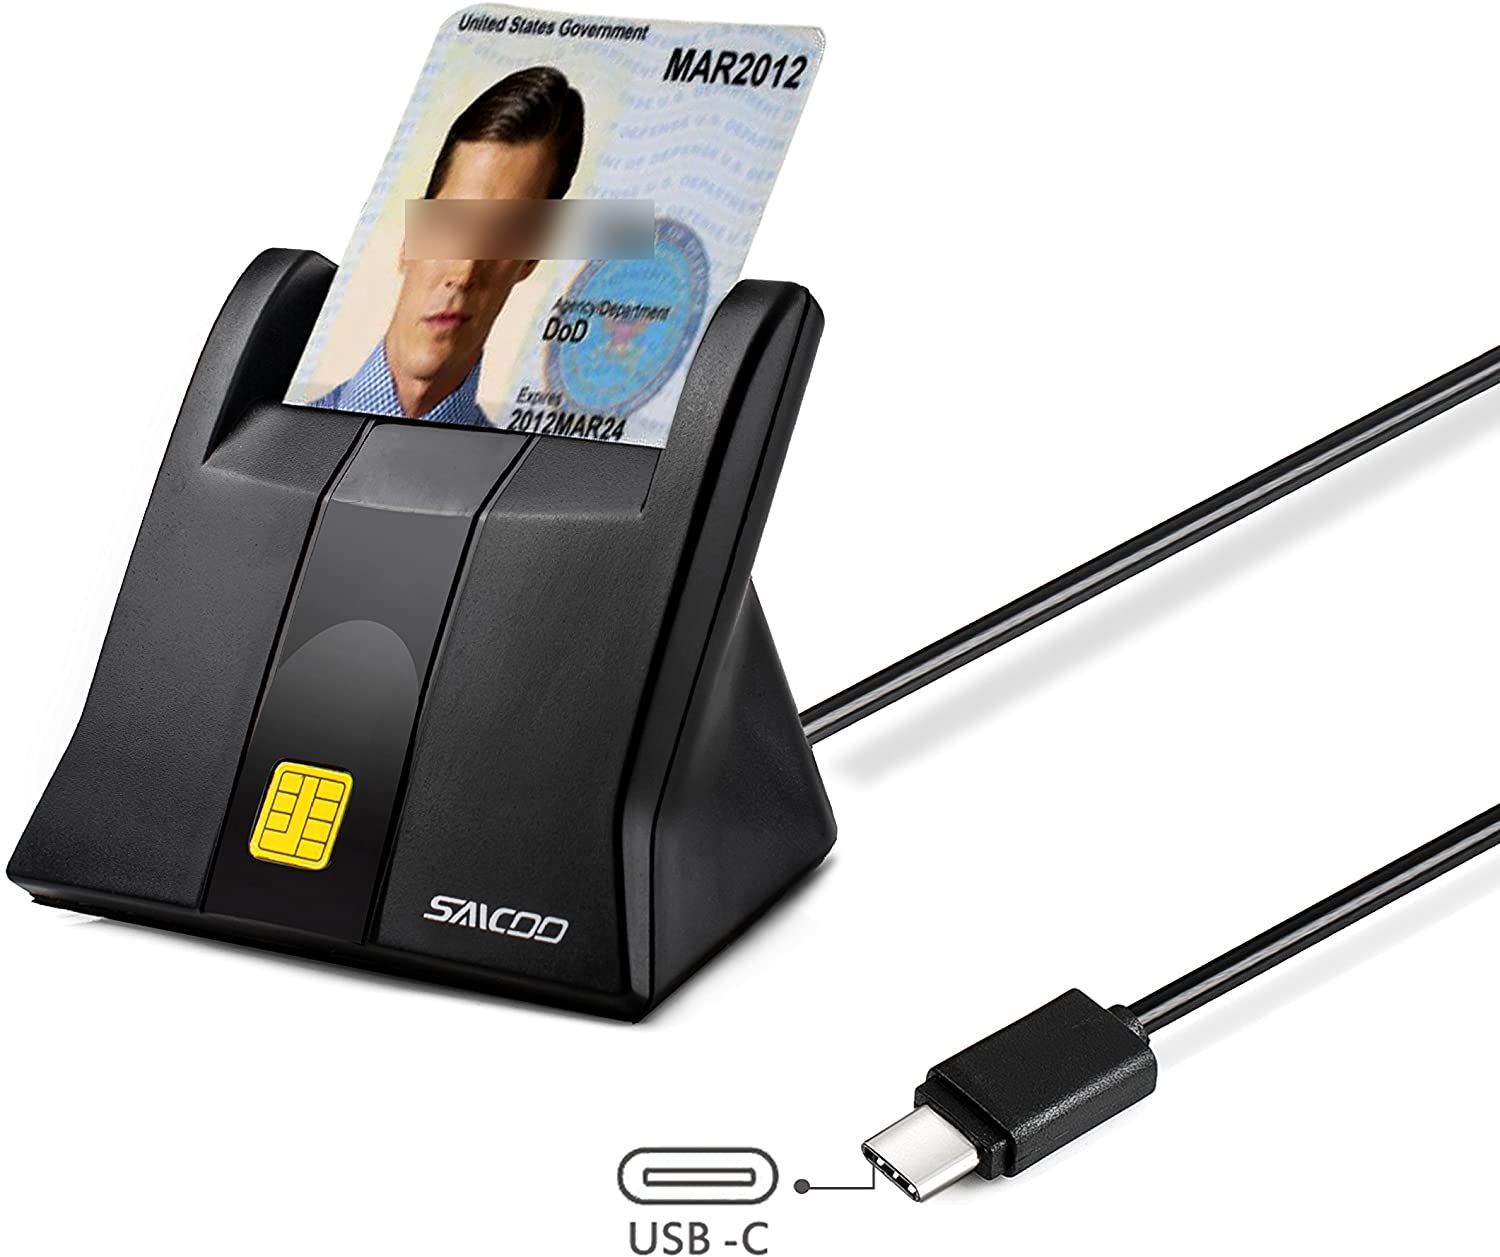 scr3310 cac card reader for mac